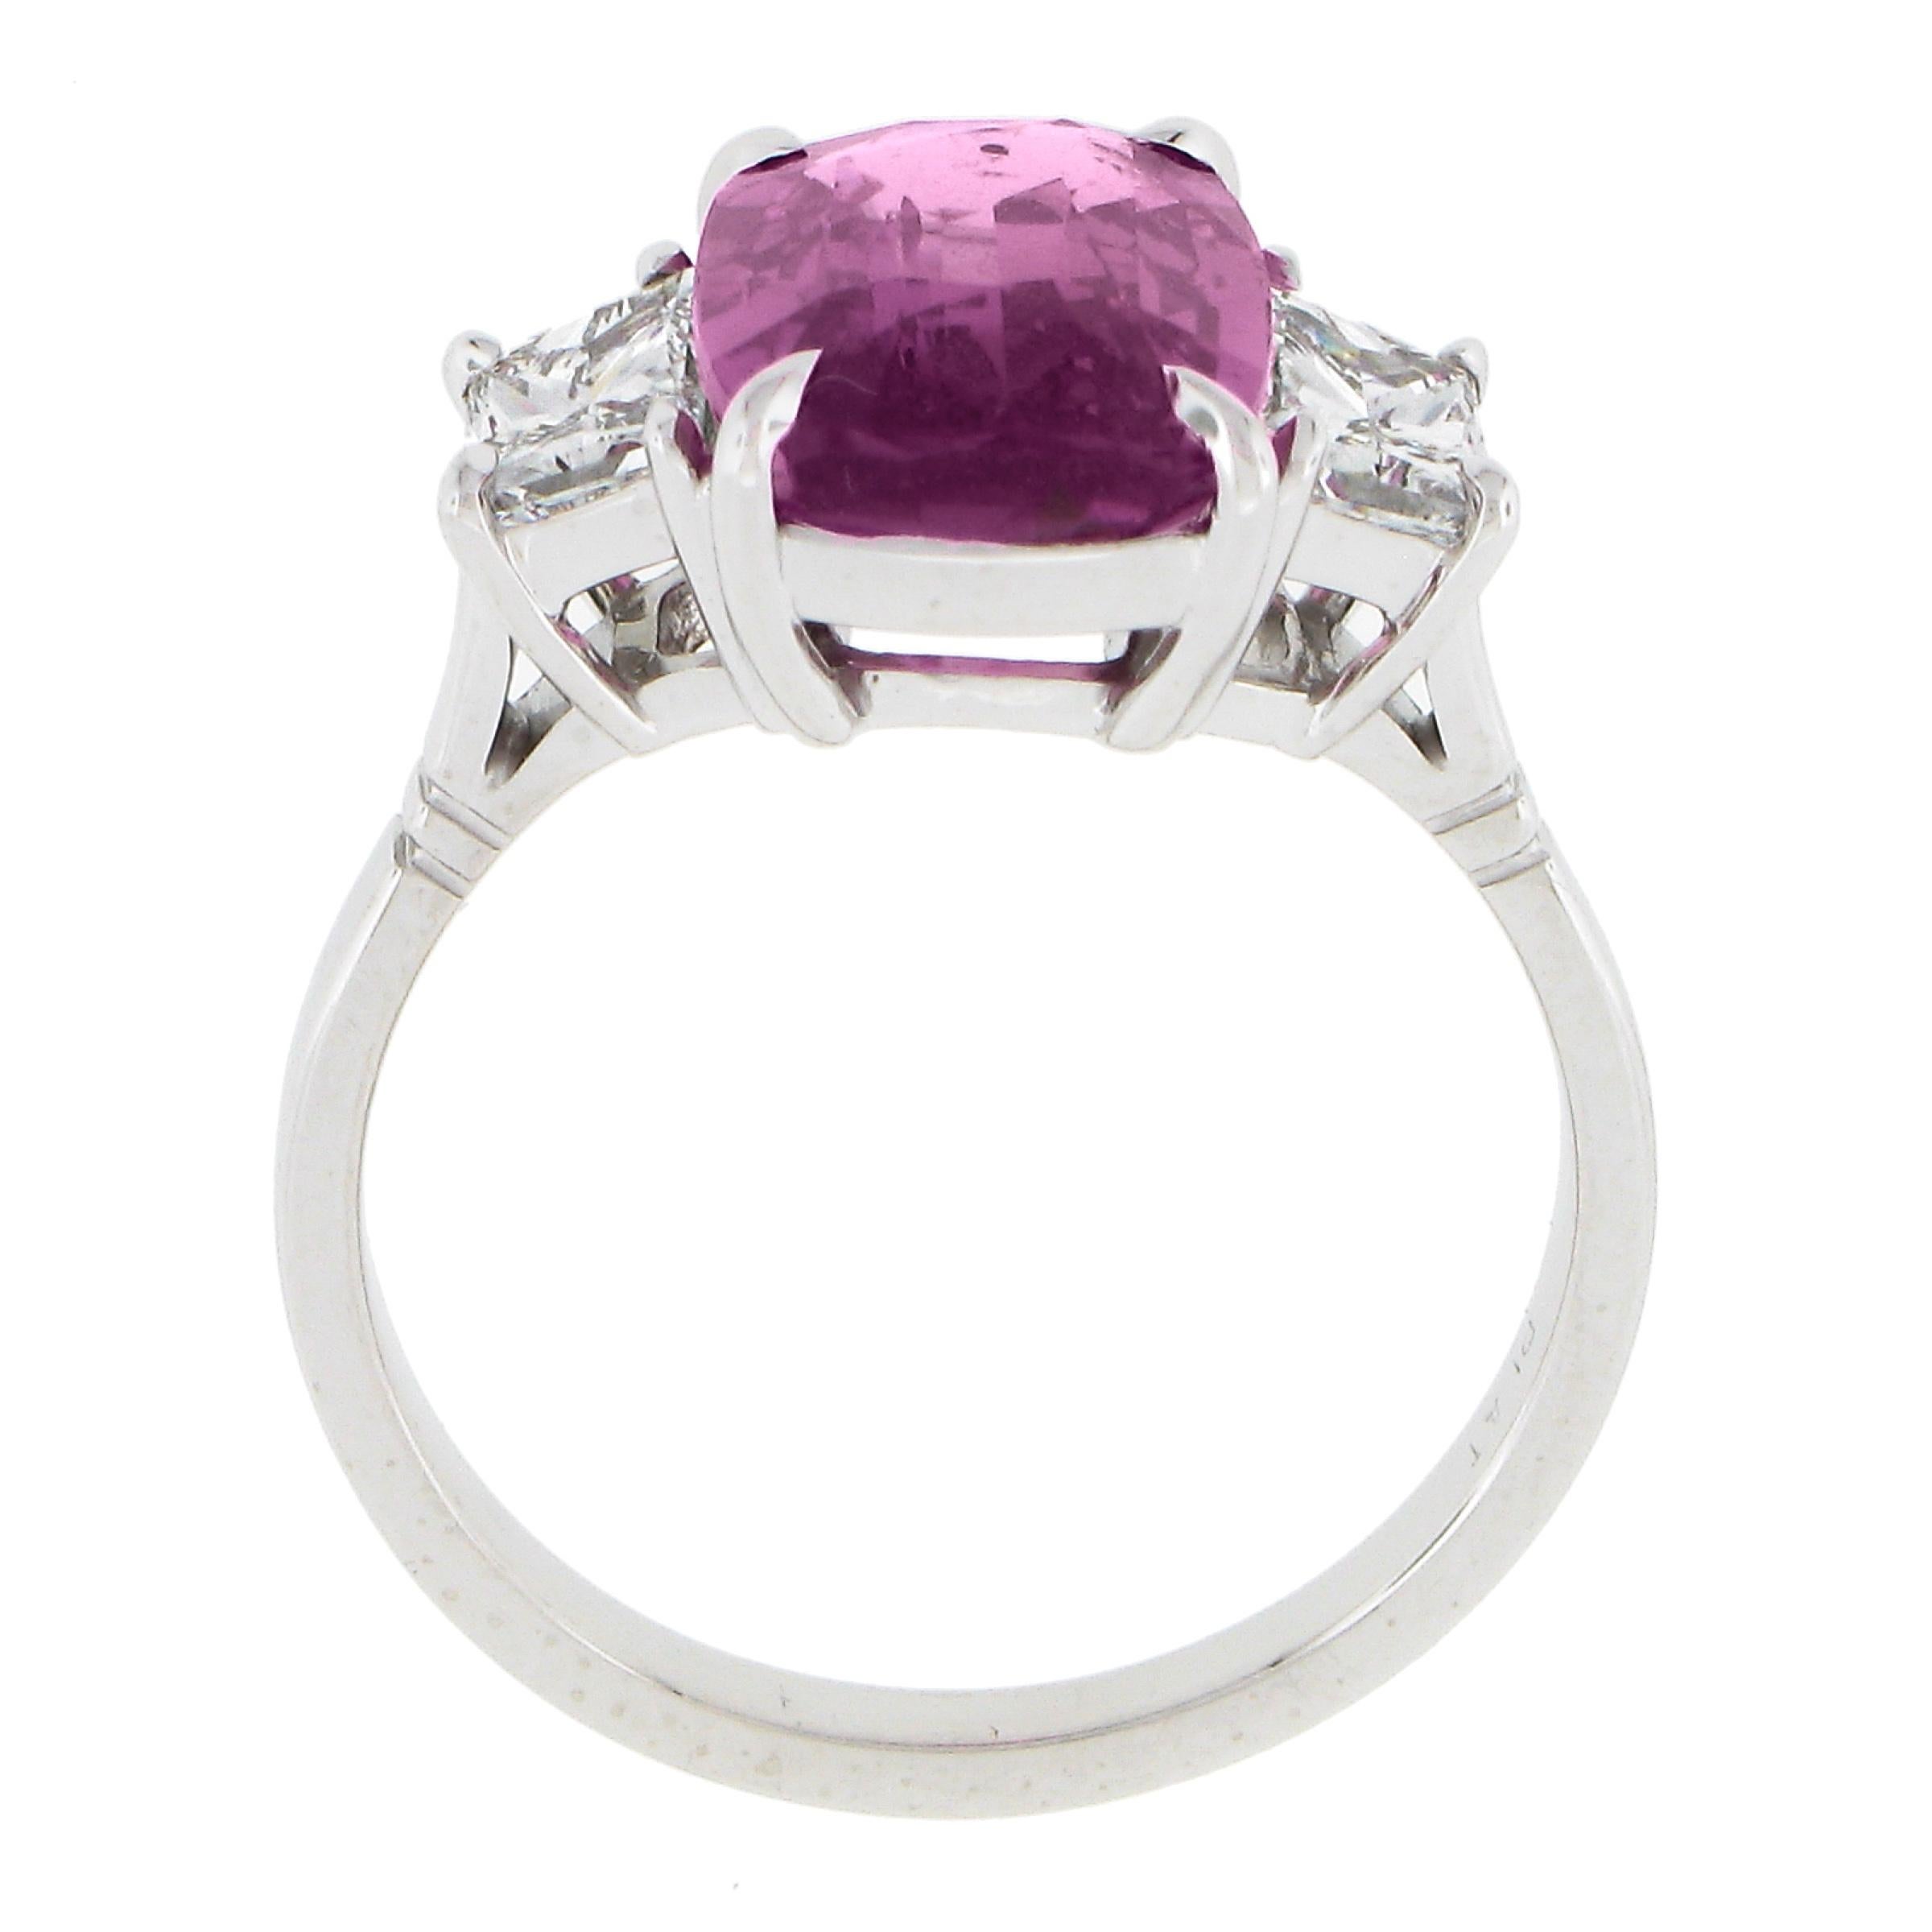 New Platinum 6.13ctw AGL Cushion Pink Sapphire & Long Trapezoid Diamond Ring For Sale 2